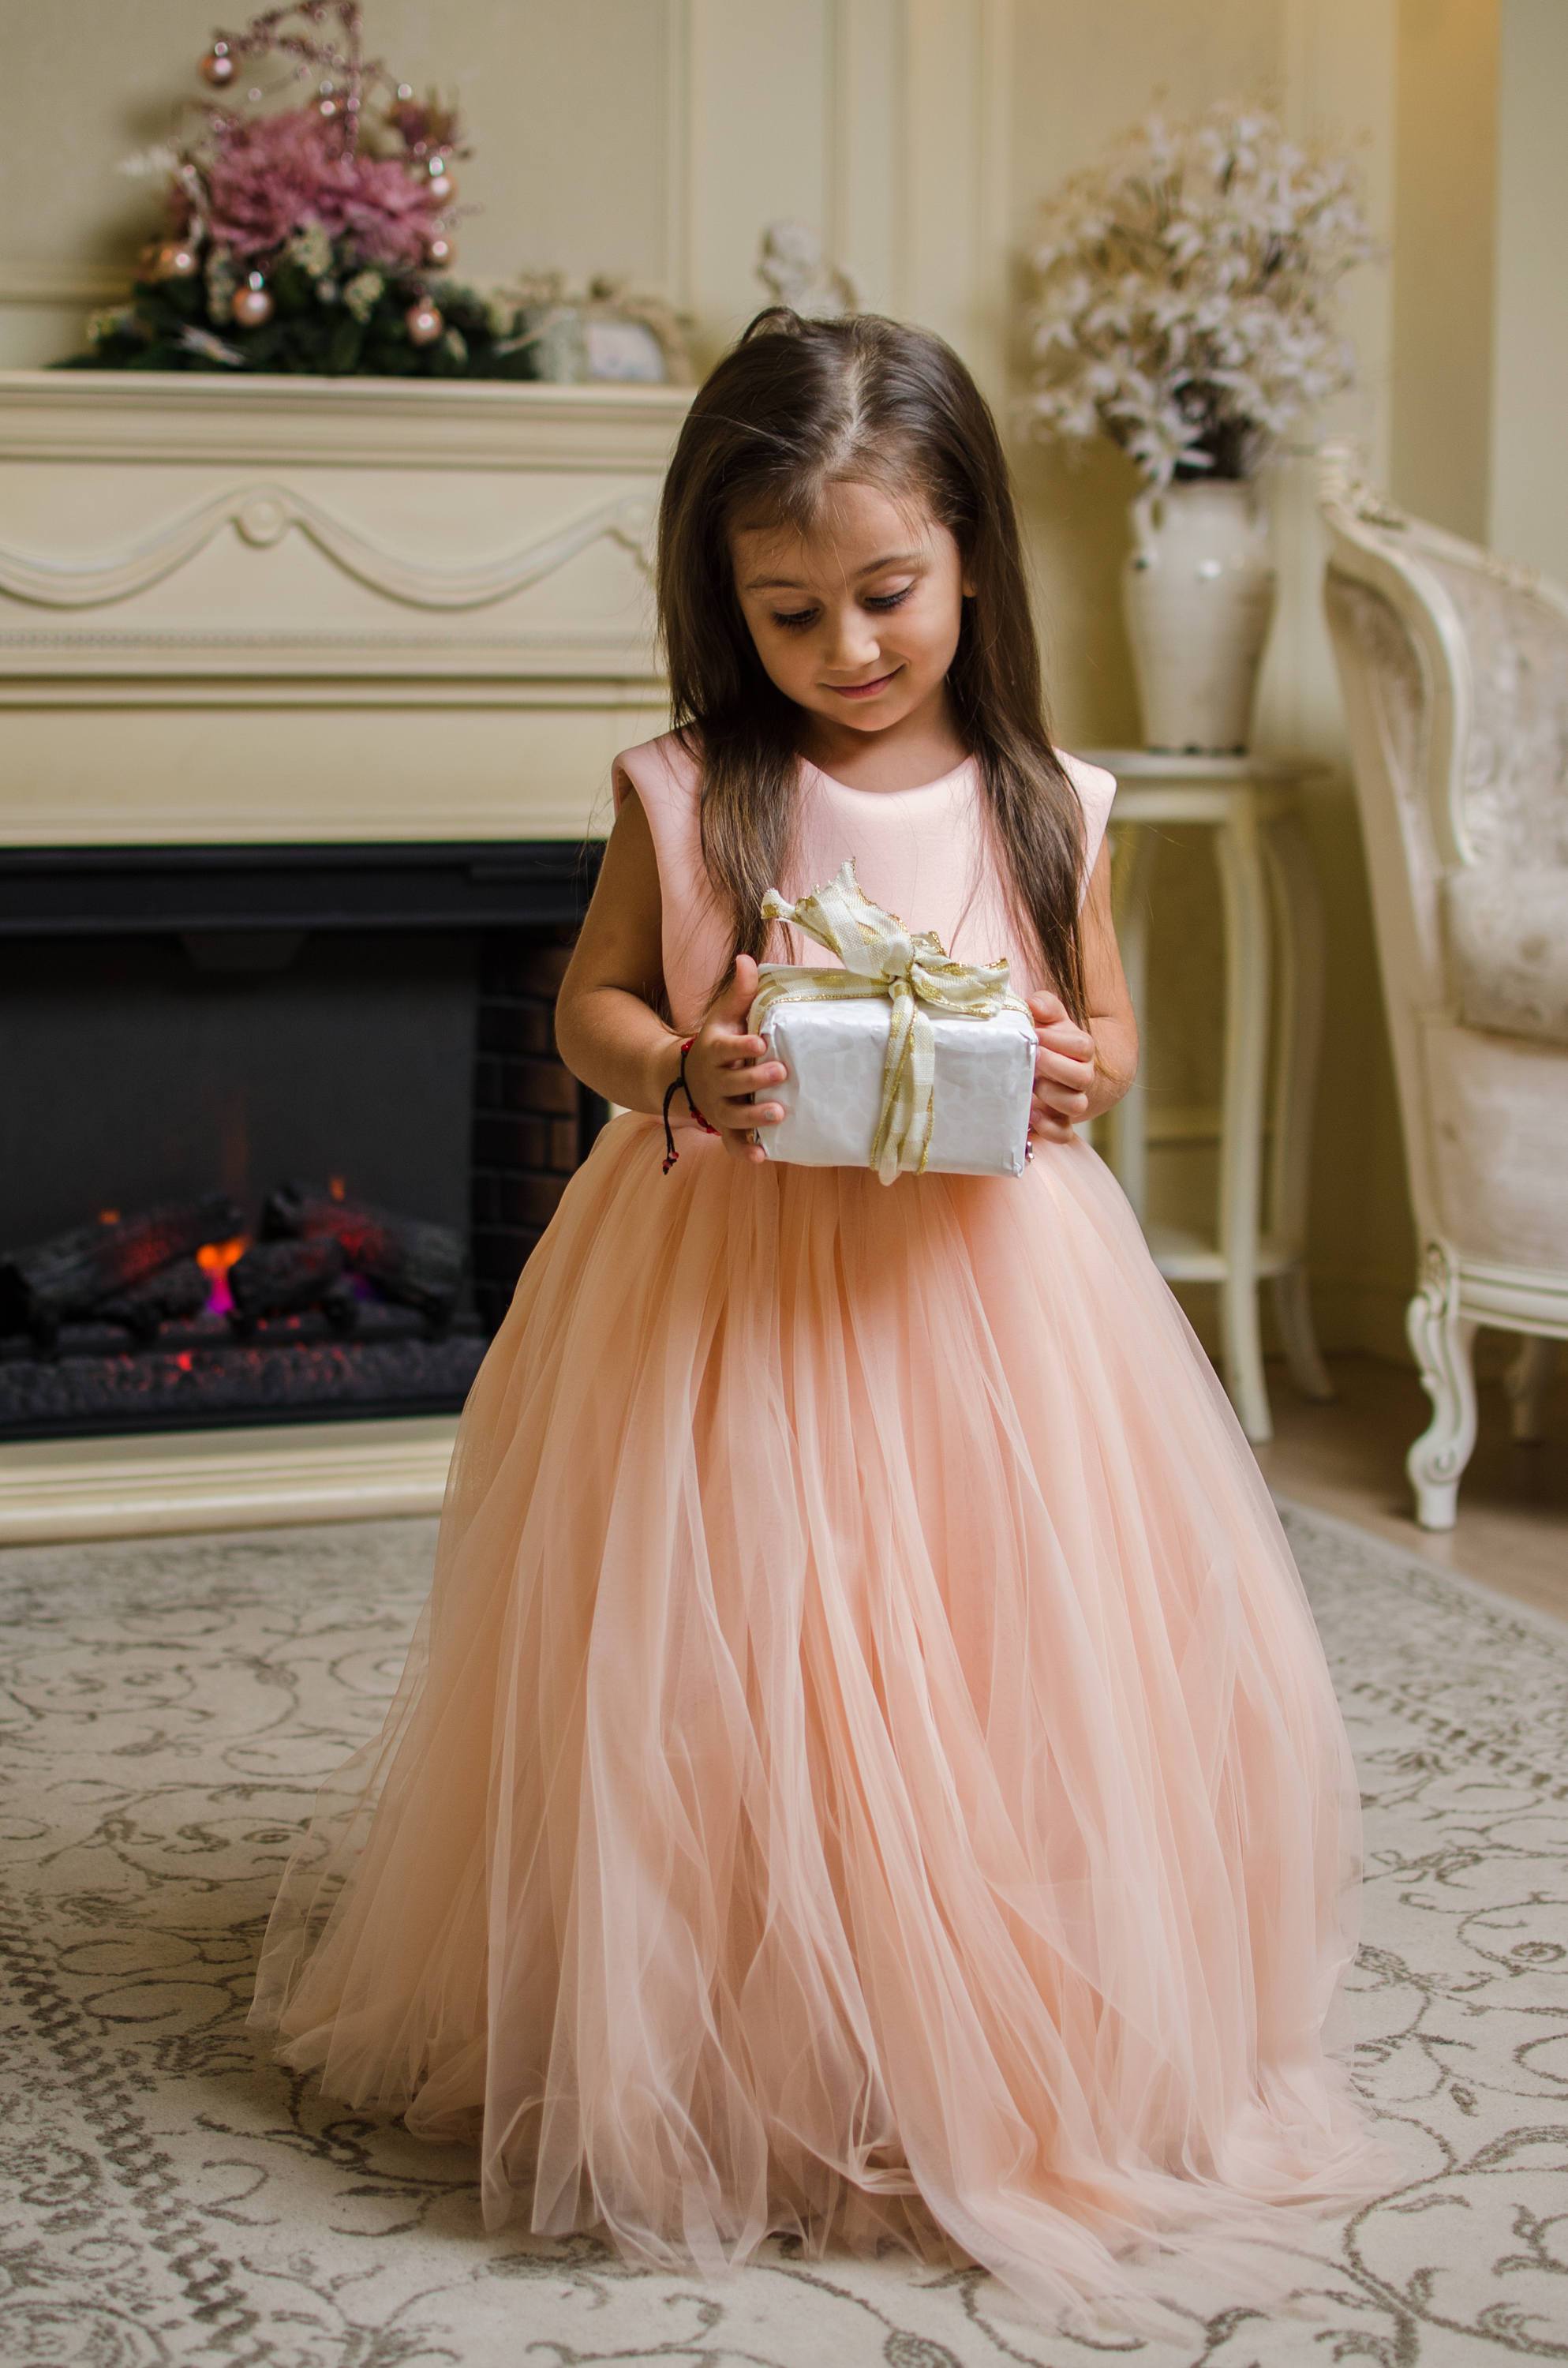 Birthday Dress - Girls Party Wear Beige Color Layered Gown